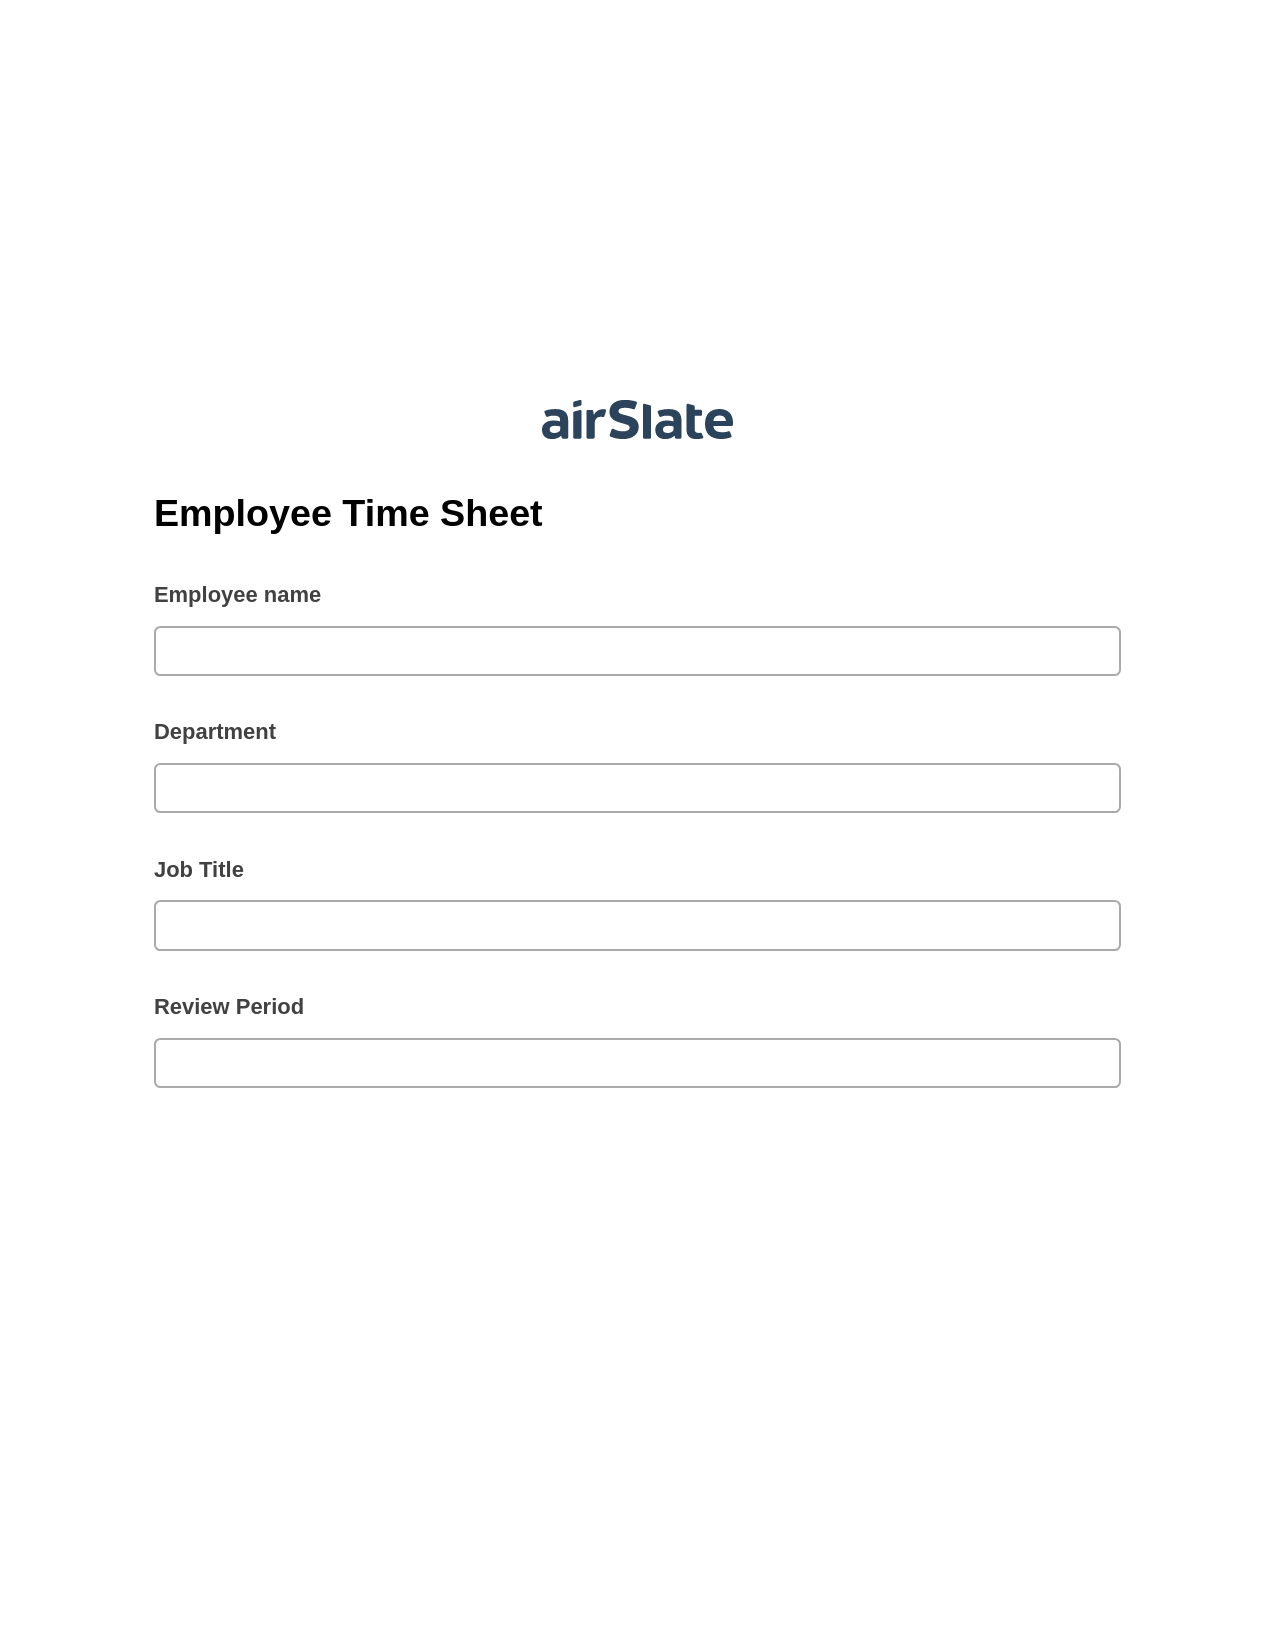 Multirole Employee Time Sheet Pre-fill Dropdowns from Airtable, Update Audit Trail Bot, Export to Smartsheet